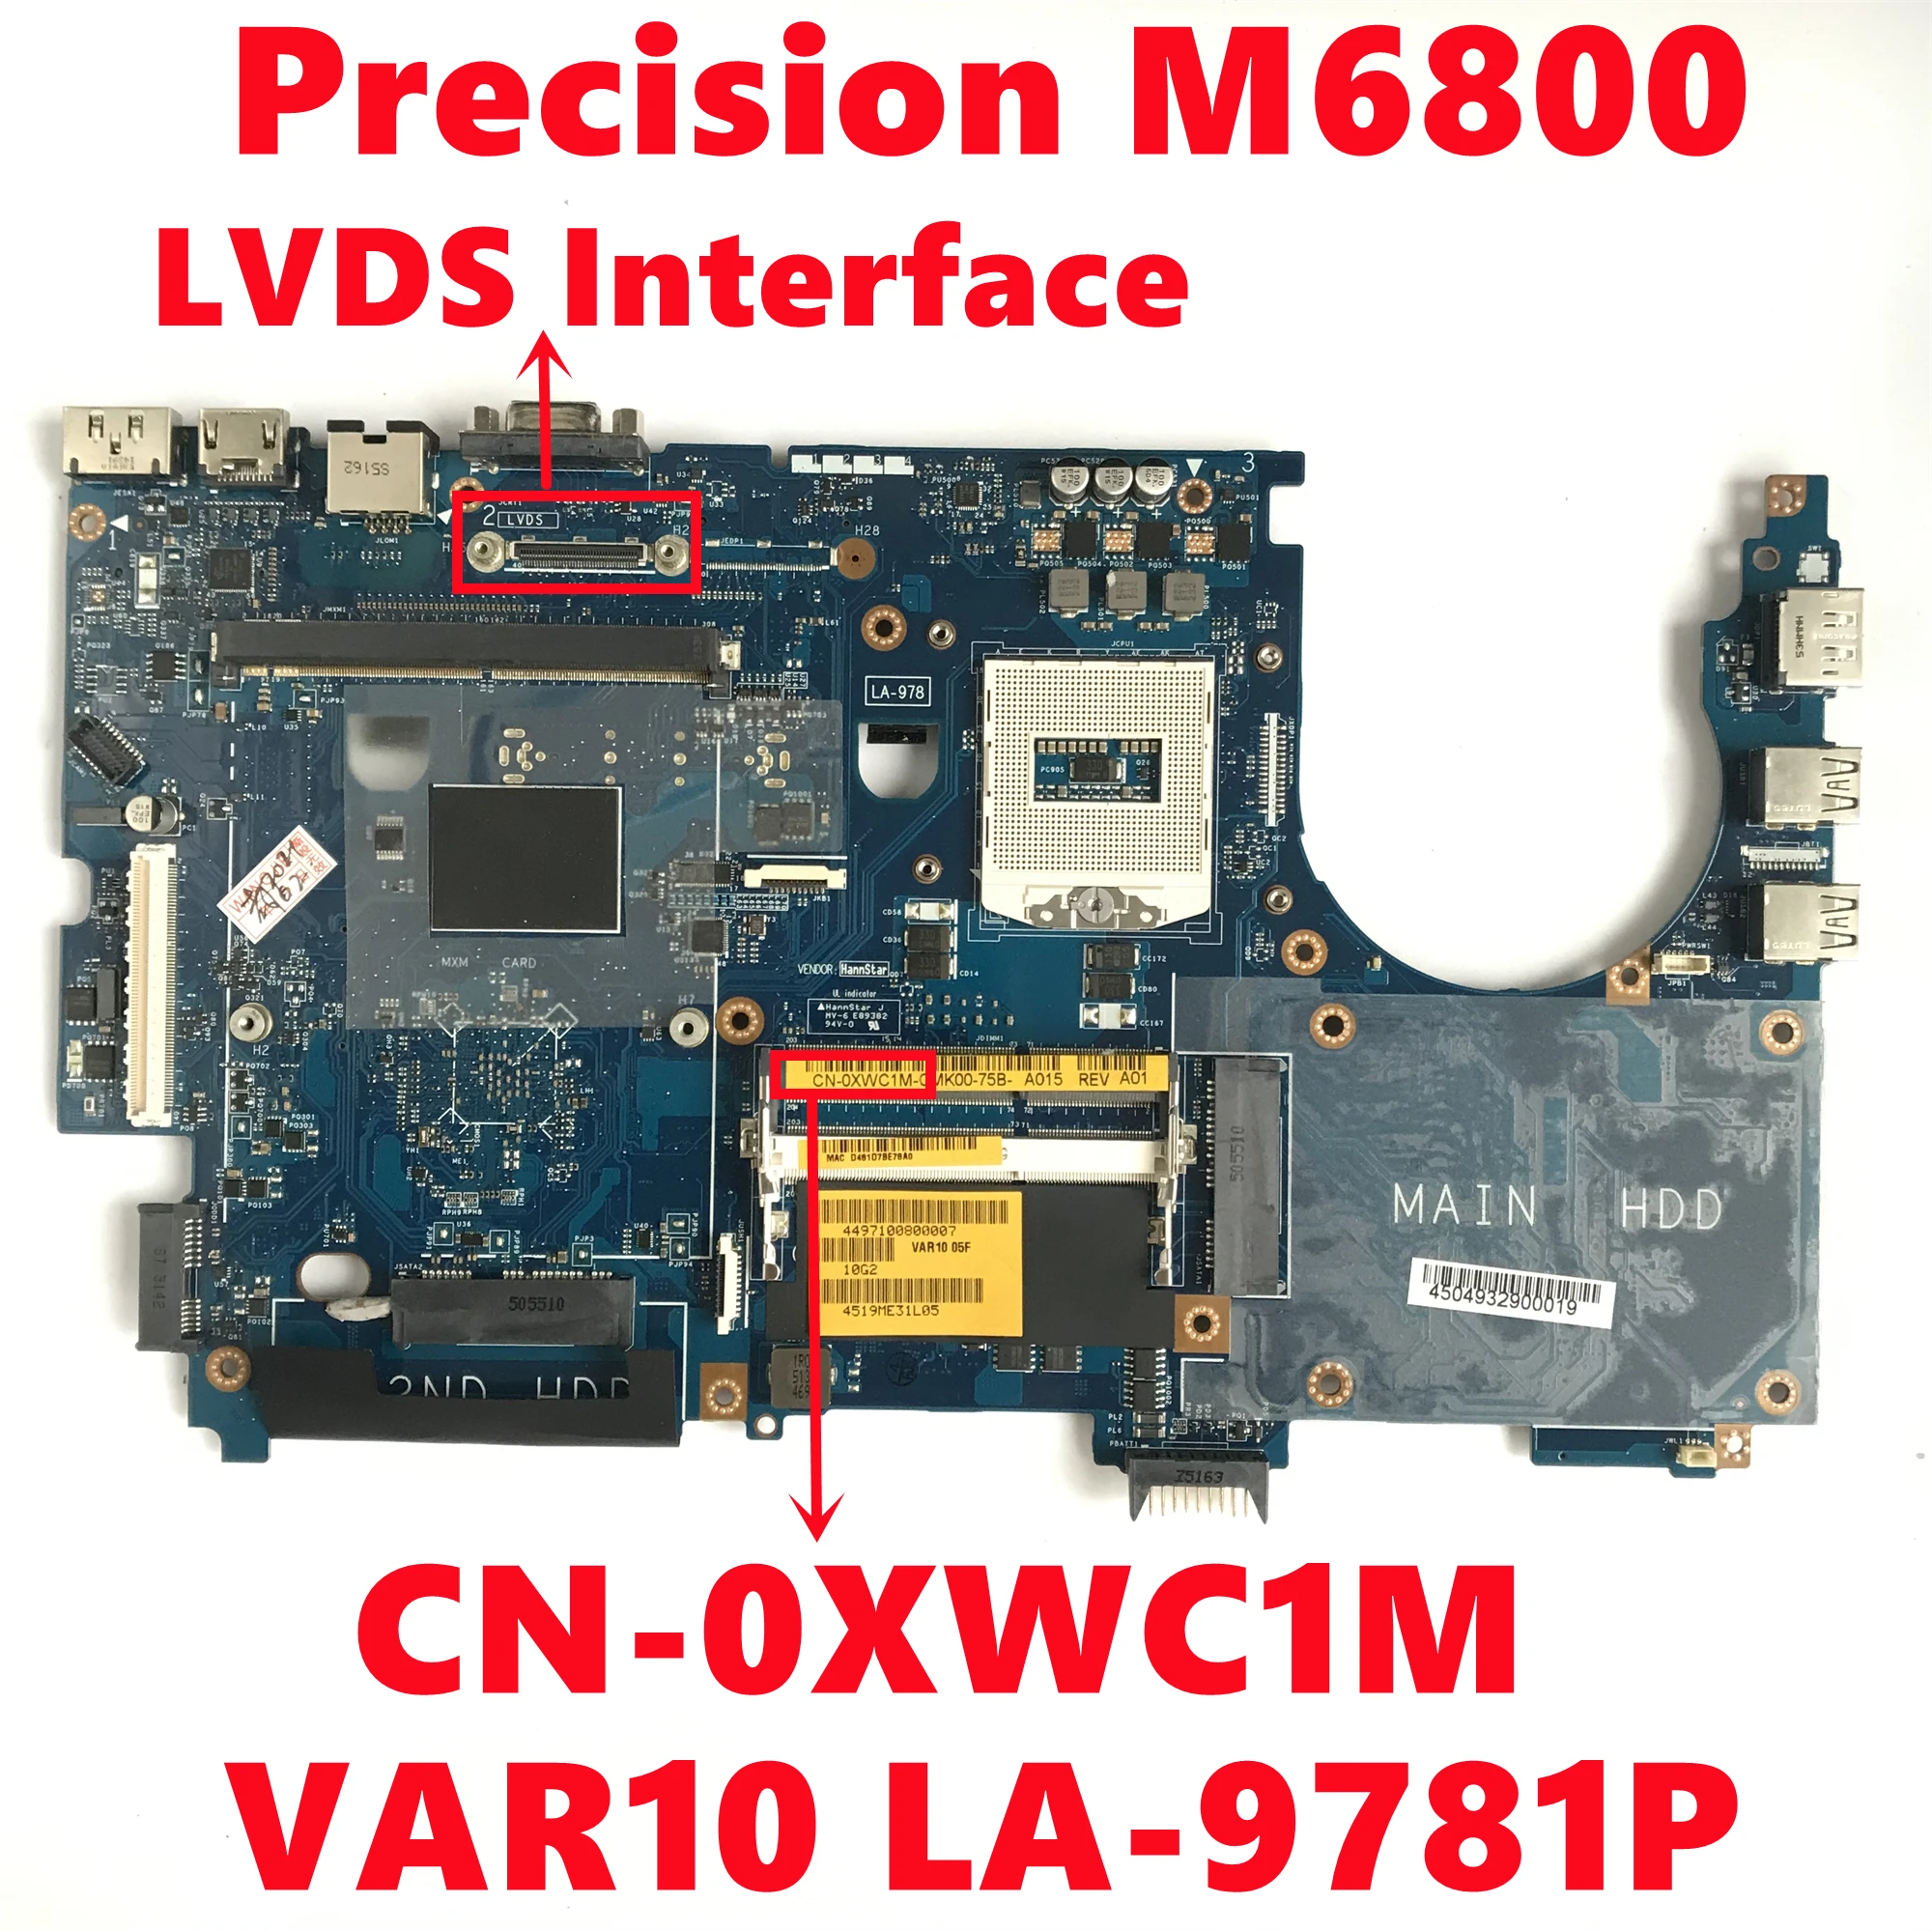 

CN-0XWC1M 0XWC1M XWC1M For Dell Precision M6800 Laptop Motherboard VAR10 LA-9781P Mainboard HM86 DDR3 LVDS Interface Fully Test